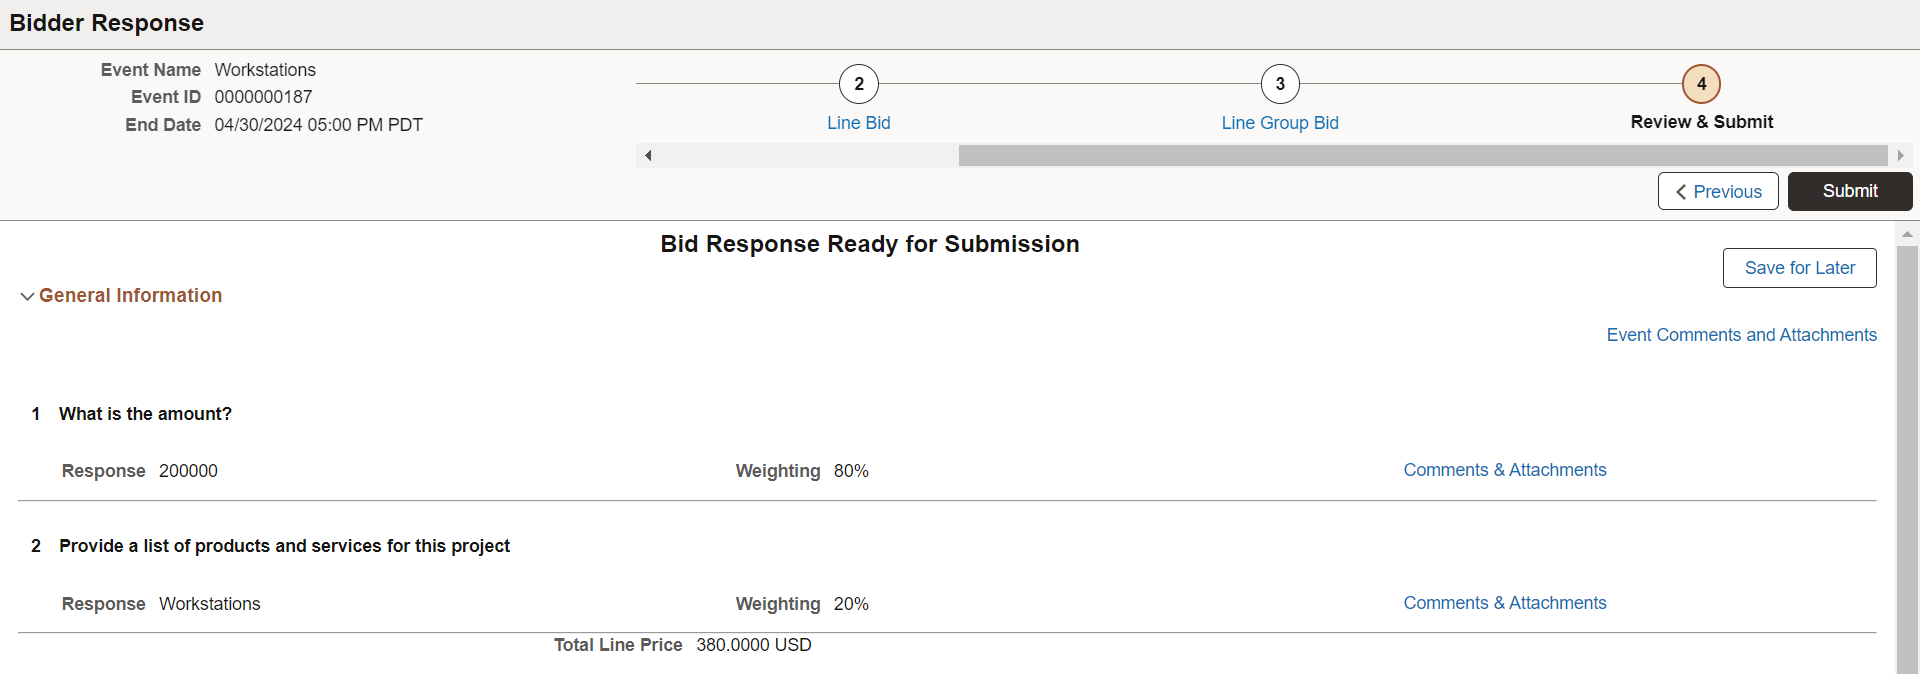 &RFX Bidder Response - Review & Submit page (1 of 2)